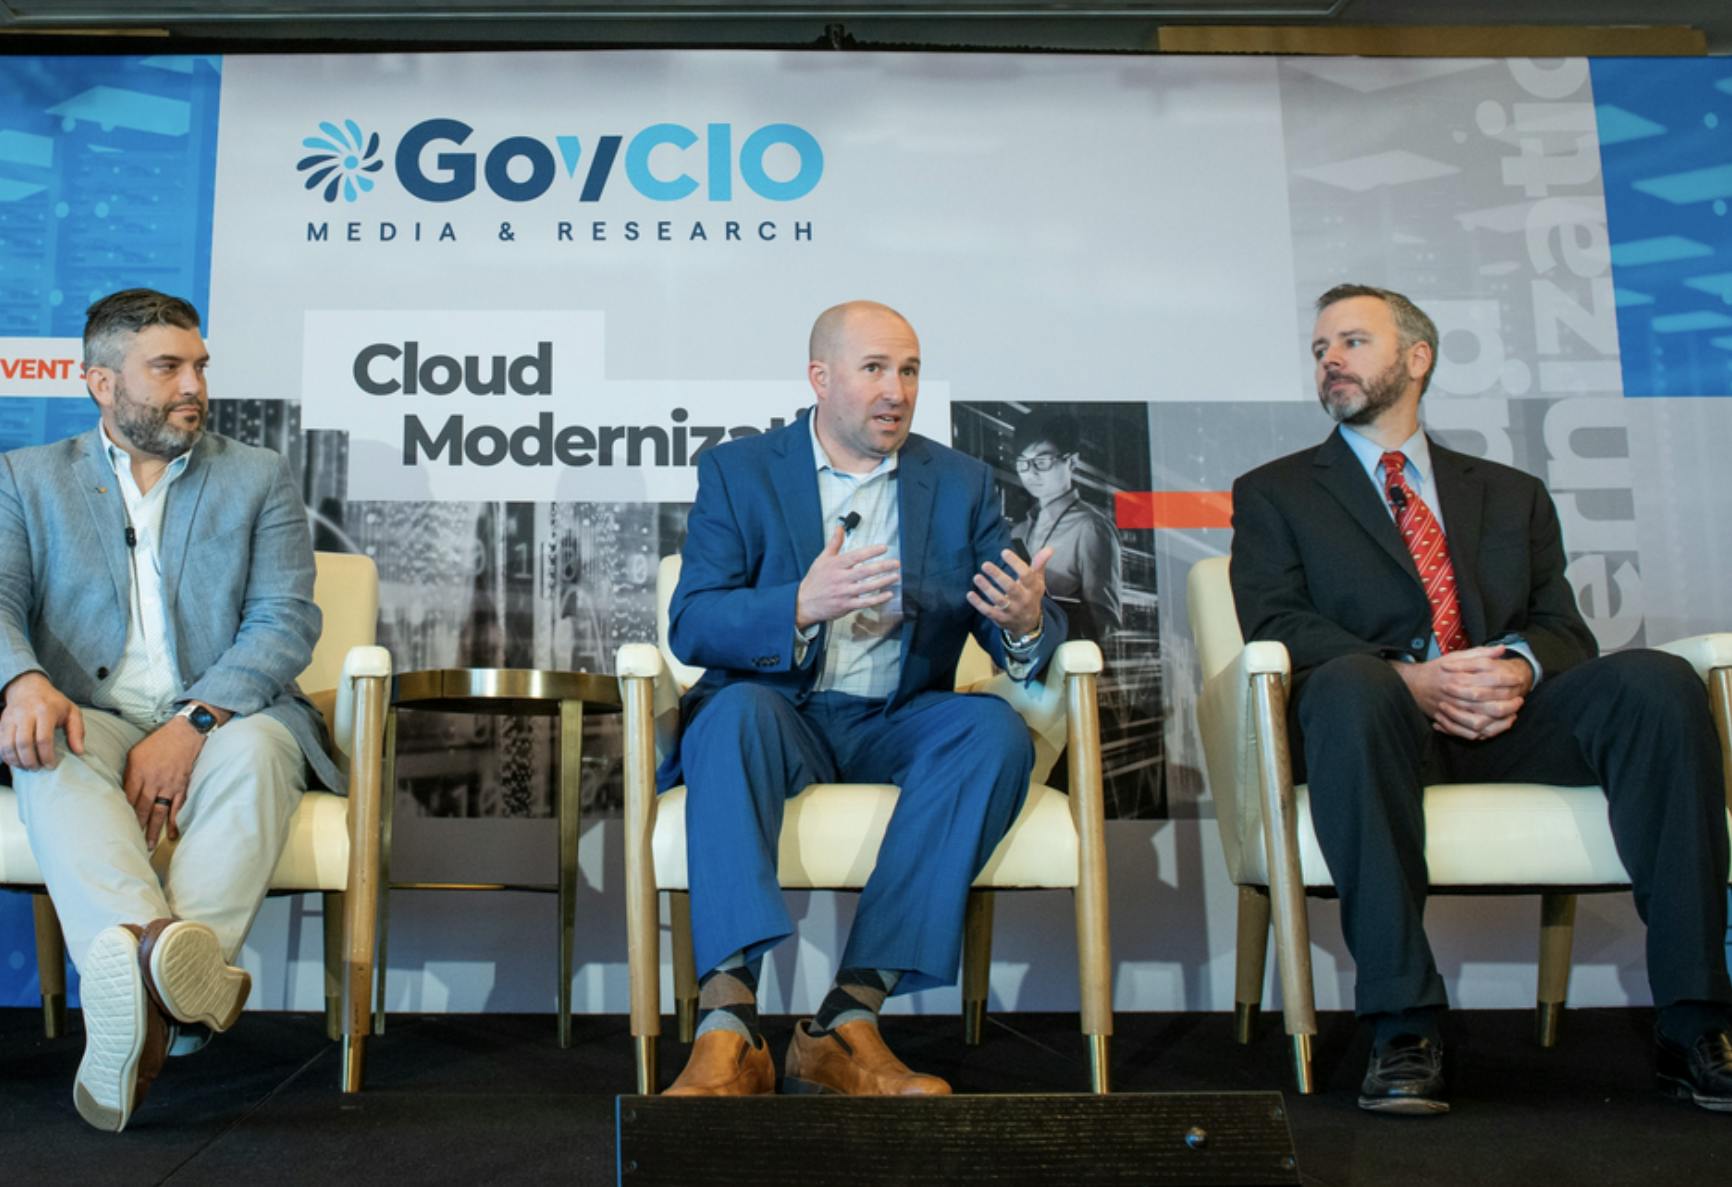 Image shows three men at GovCIO's Cloud Modernization summit. Related to: cyber workforce, cyber-aware workforce, security enablers, end point security, agile cybersecurity.